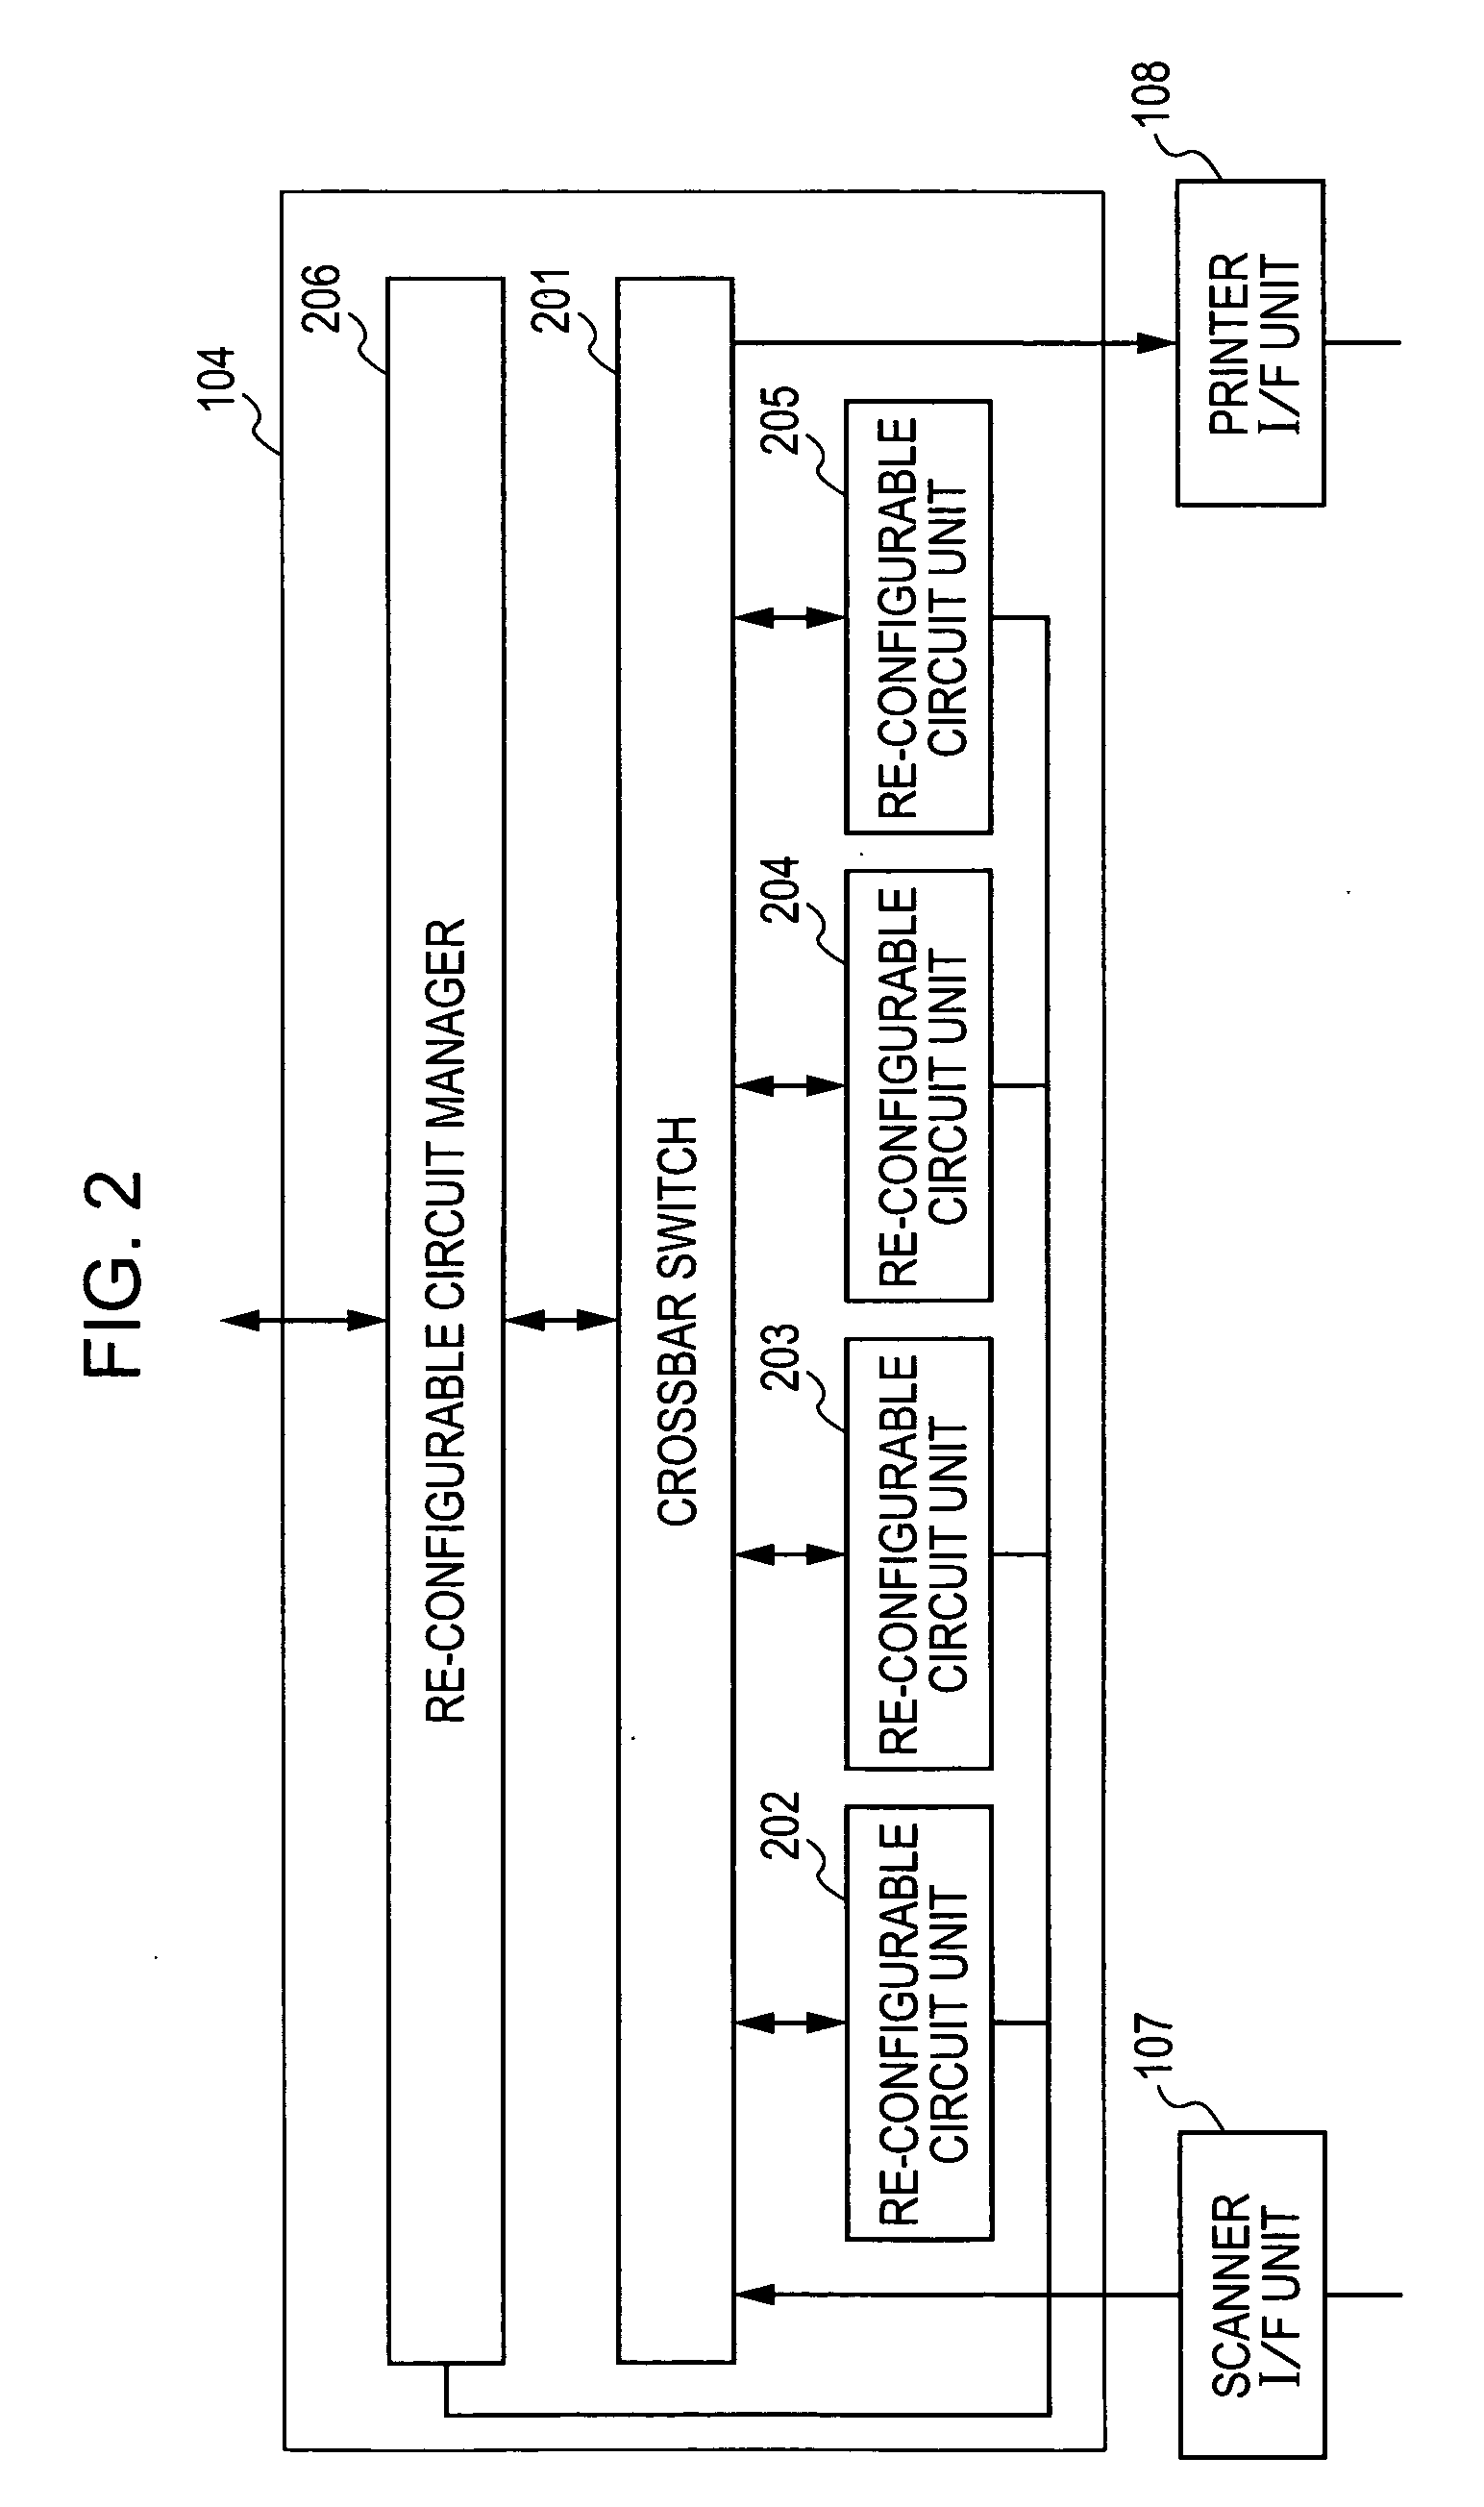 Image processing apparatus and method of controlling an image processing apparatus